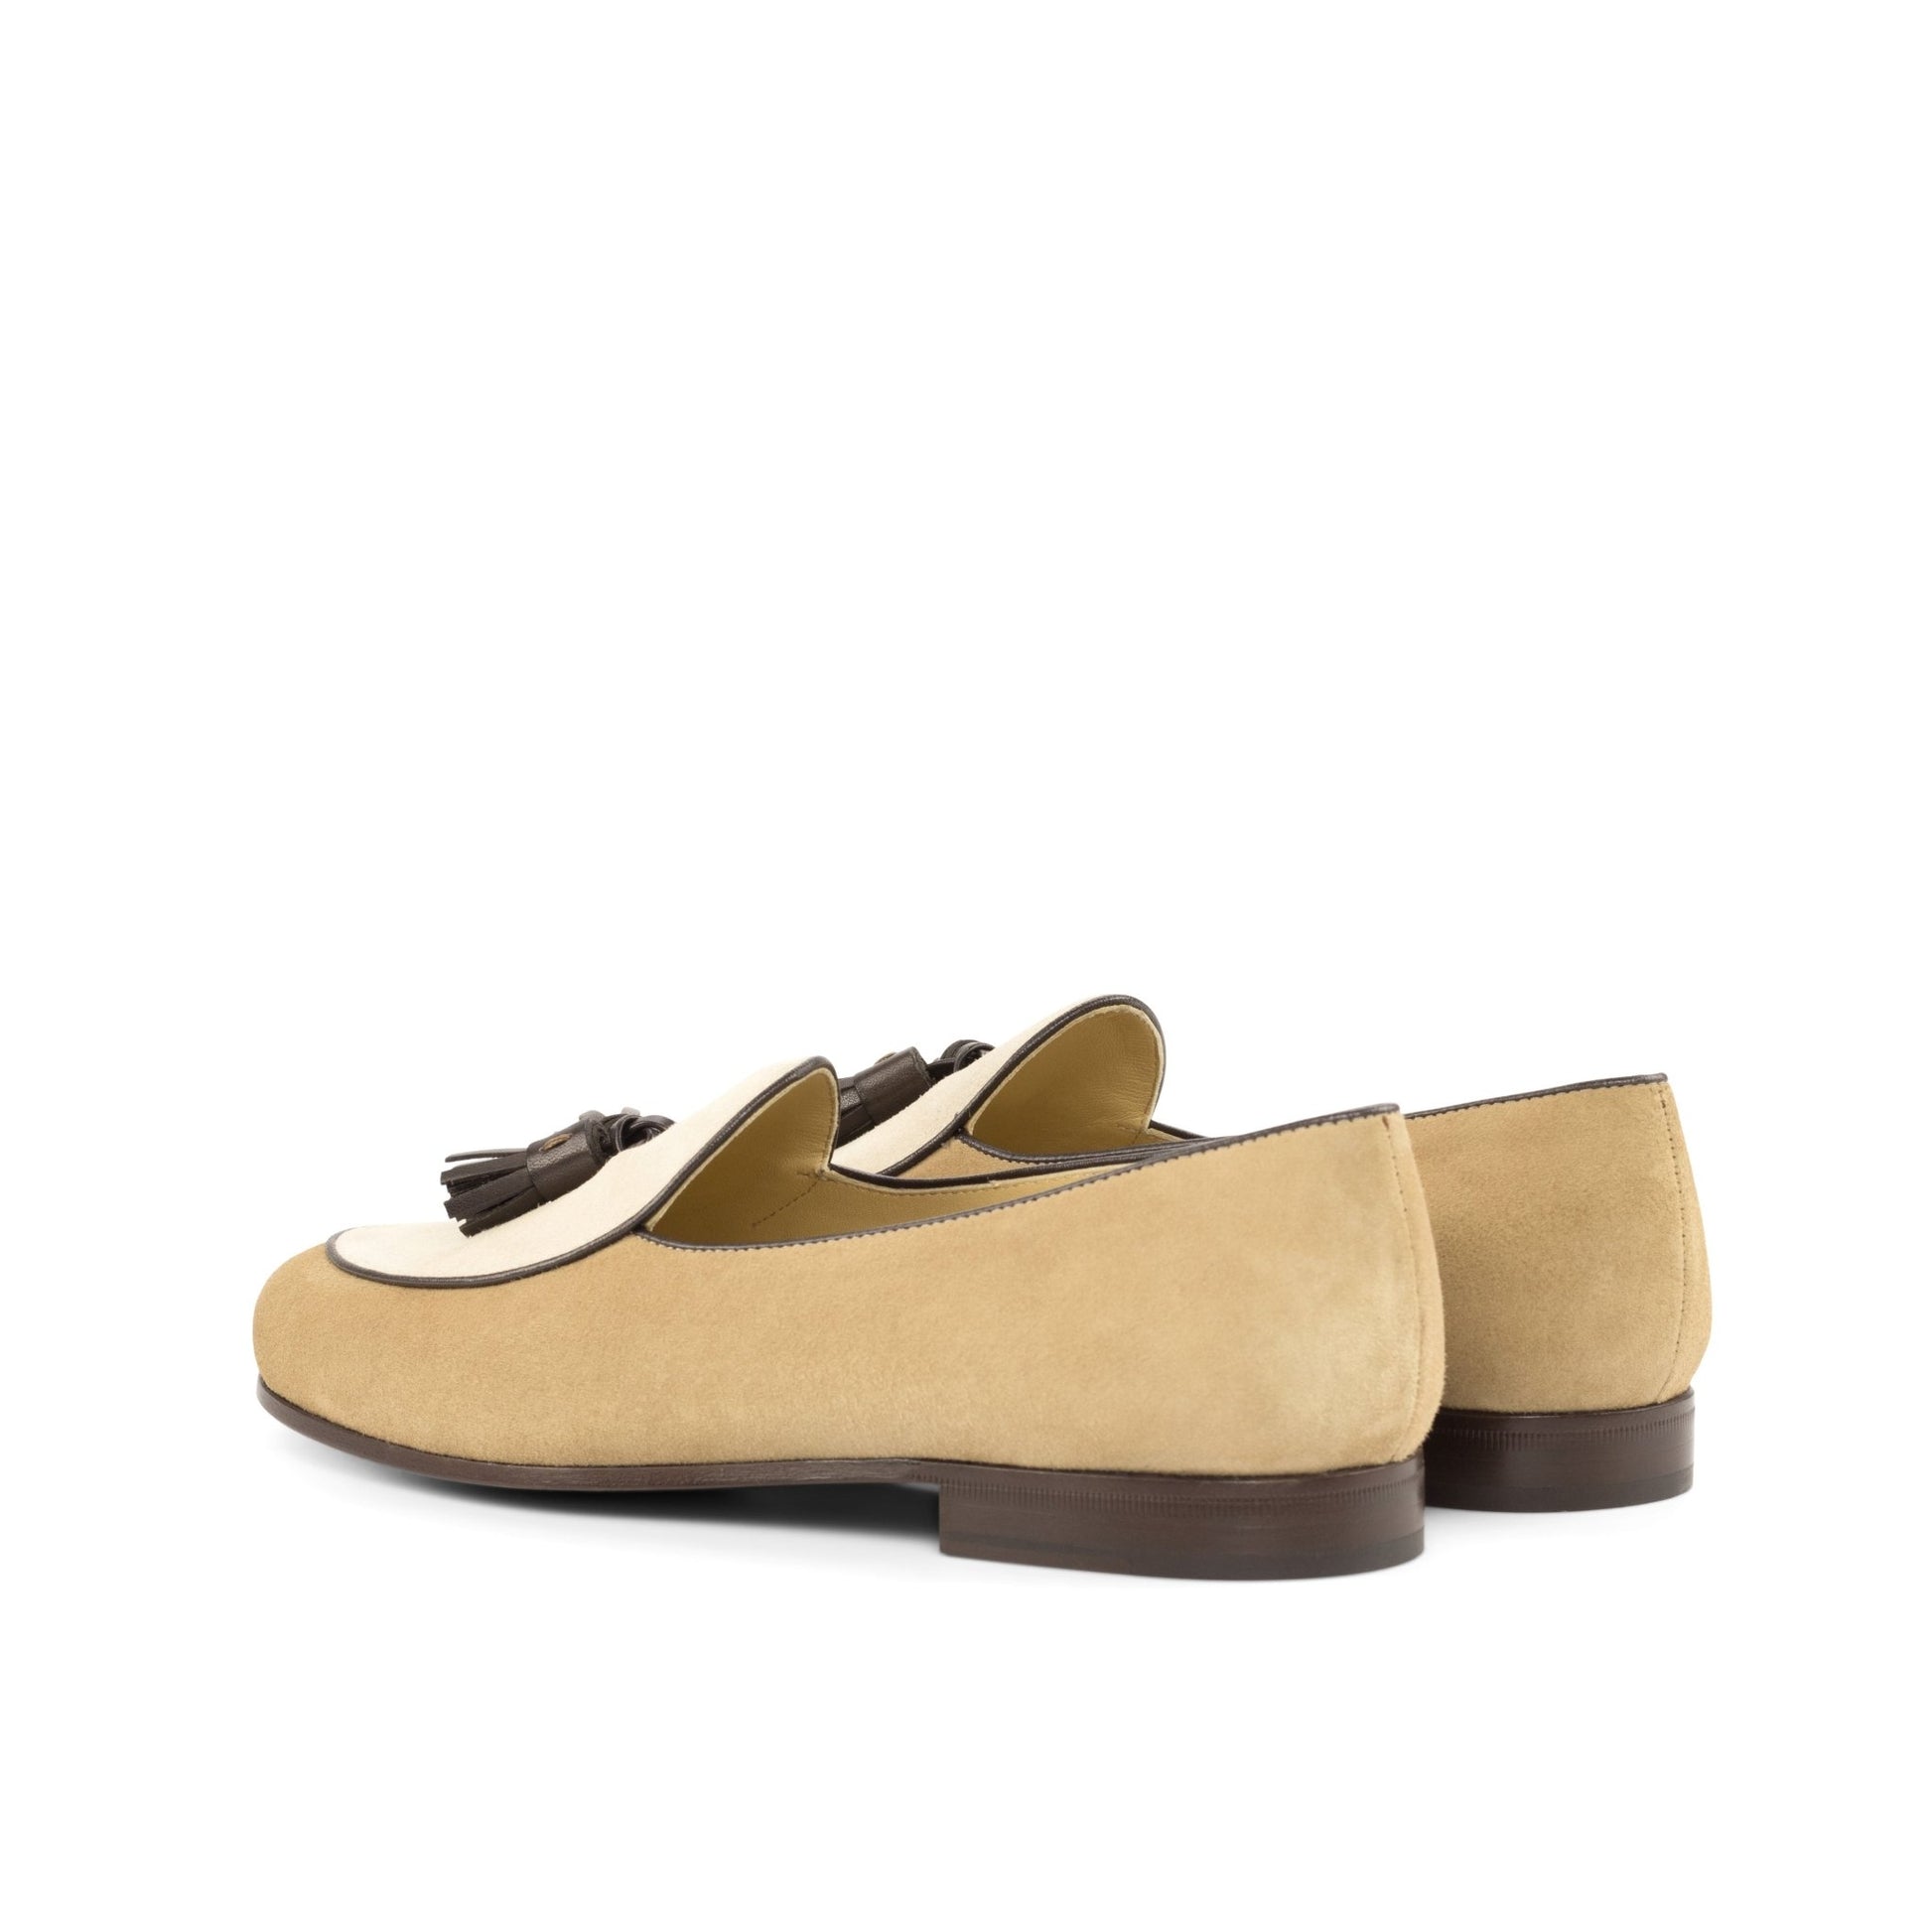 Belgian Slipper in Ivory Suede and Camel Suede - Zatorres | Free Shipping on orders over $200